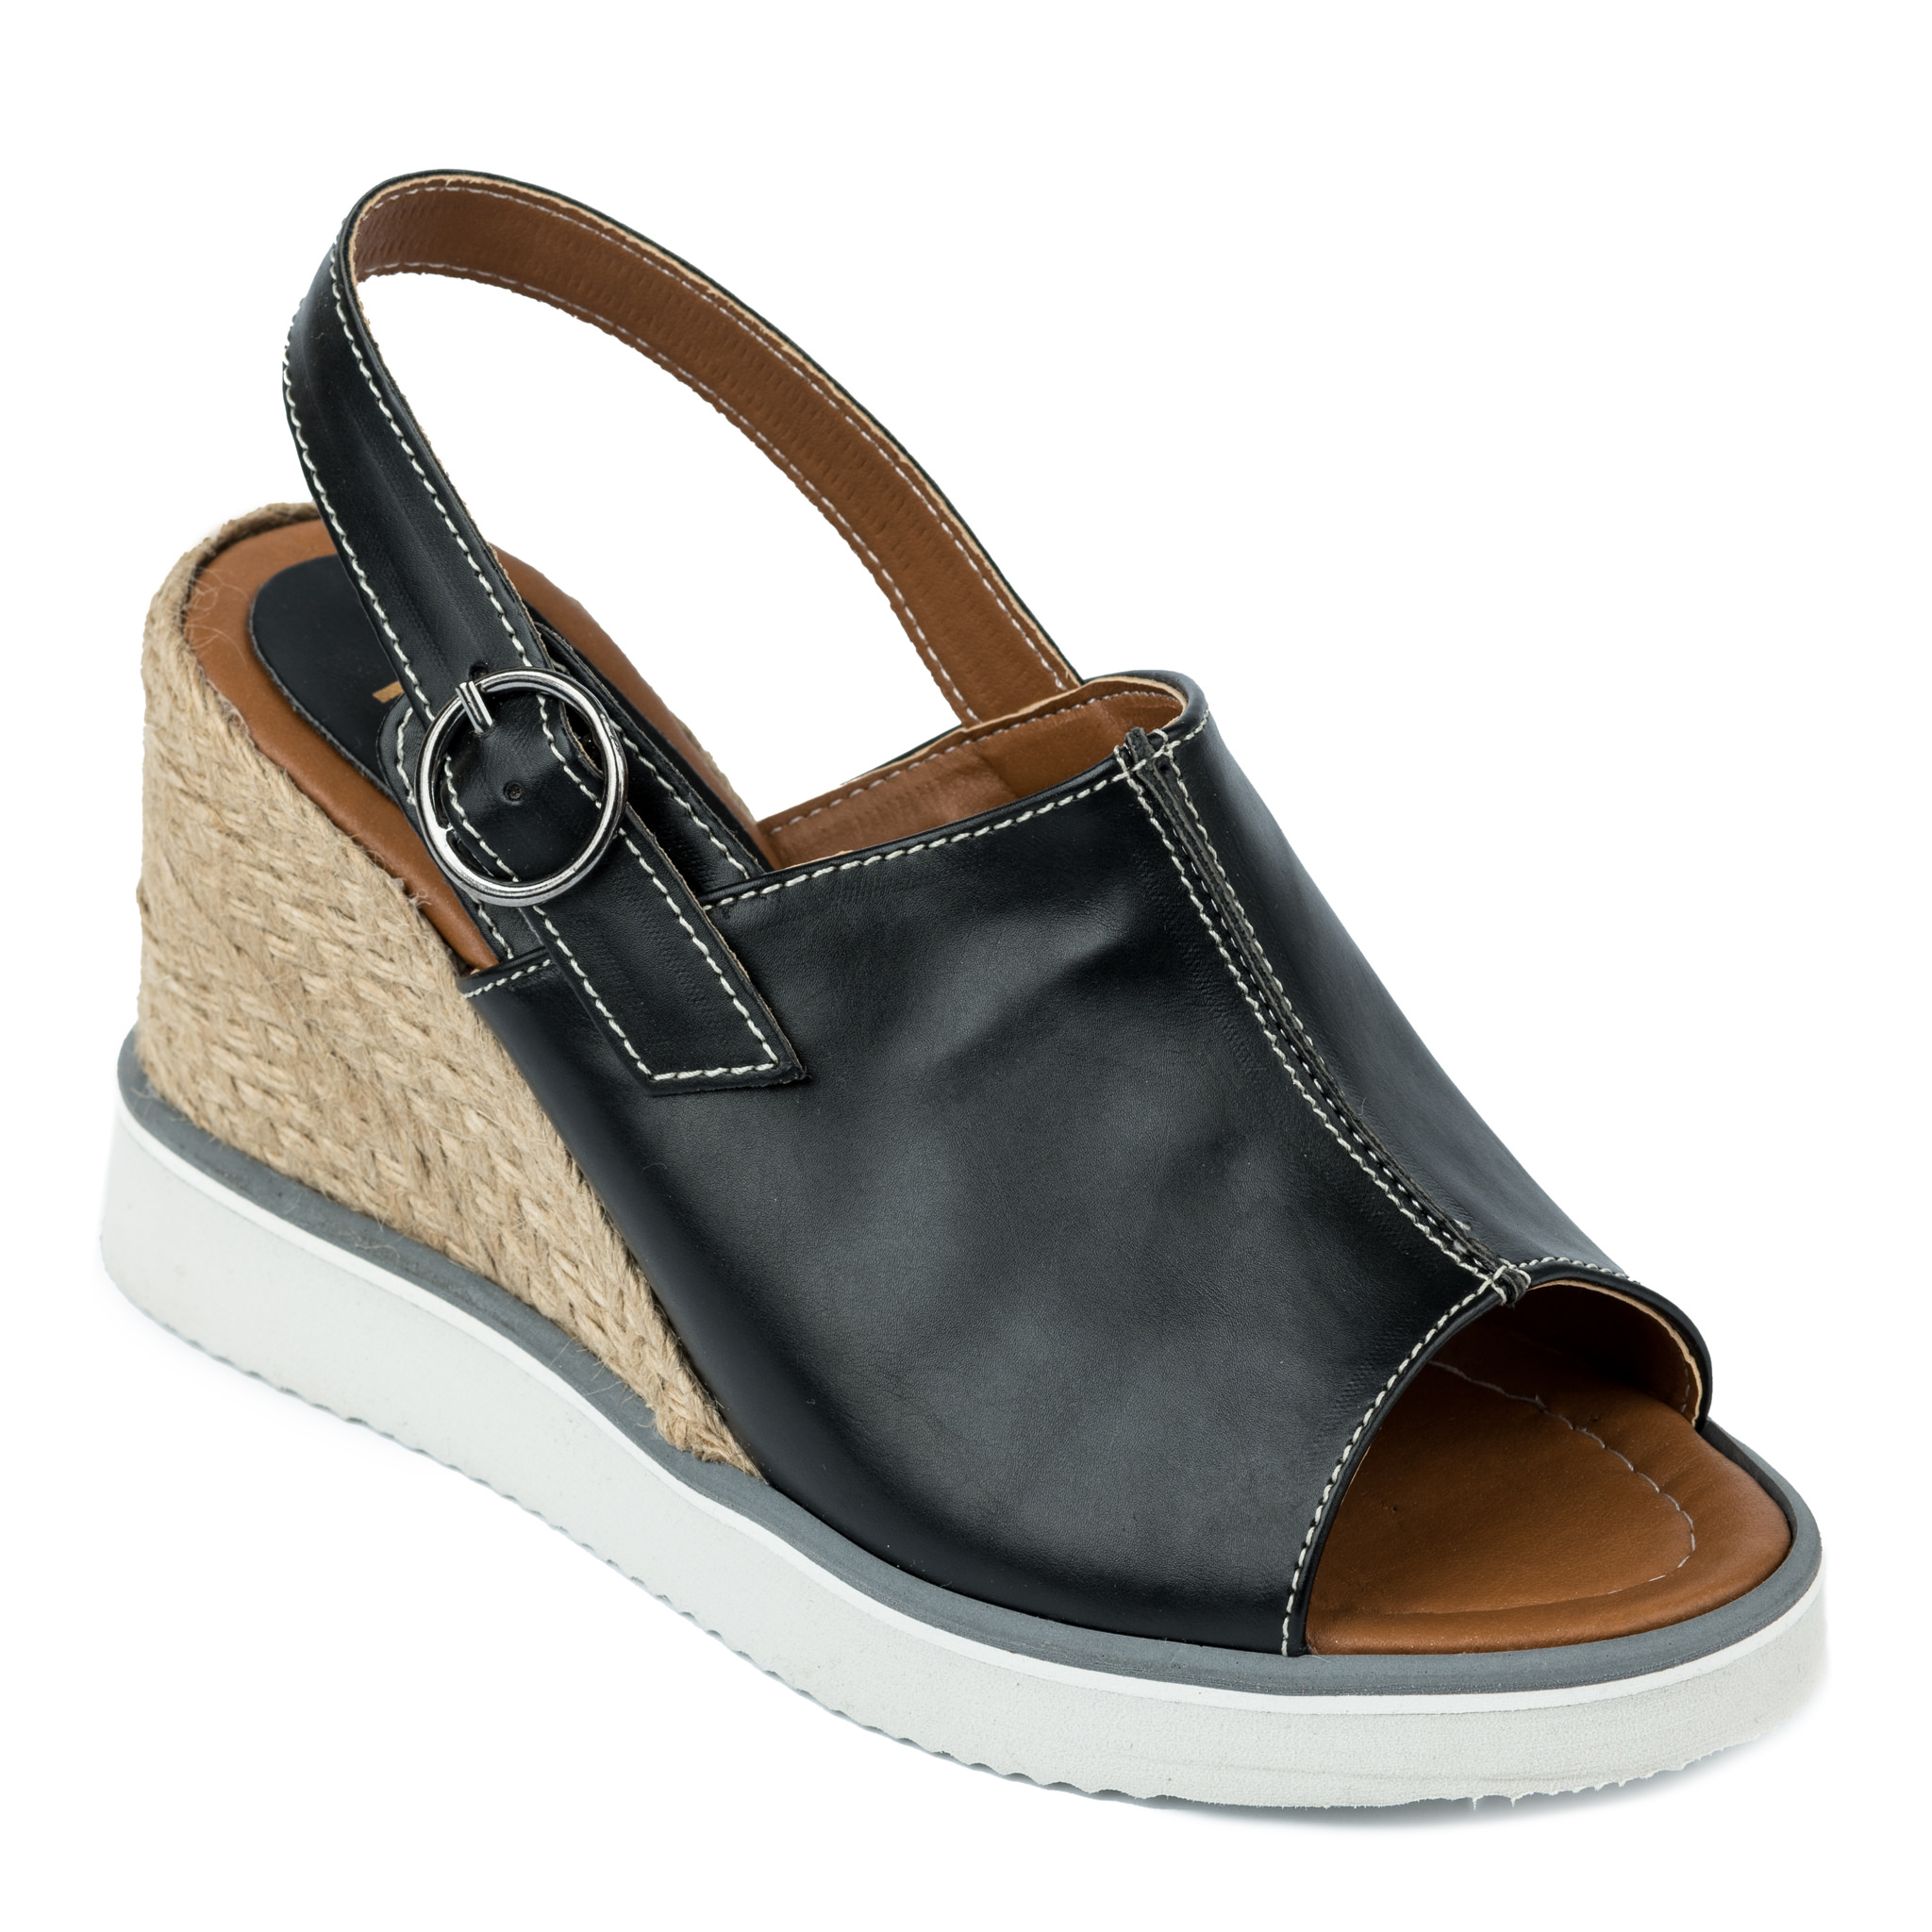 WEDGE SANDALS WITH JUTA AND SAW - BLACK